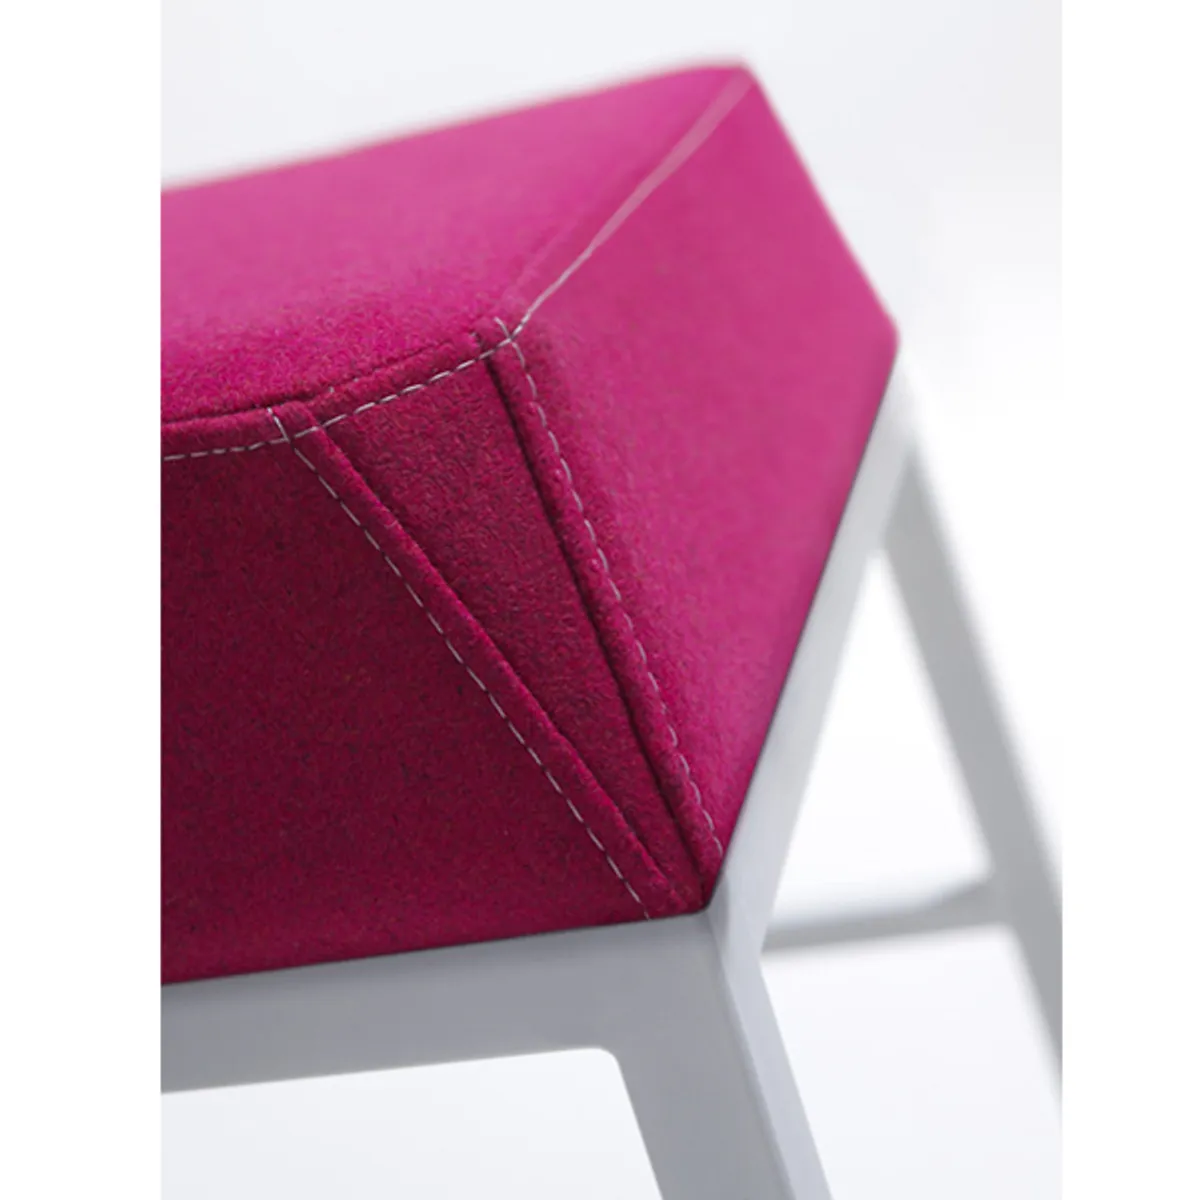 Beth Barstool Seat Detail Magenta Fabric Inside Out Contracts